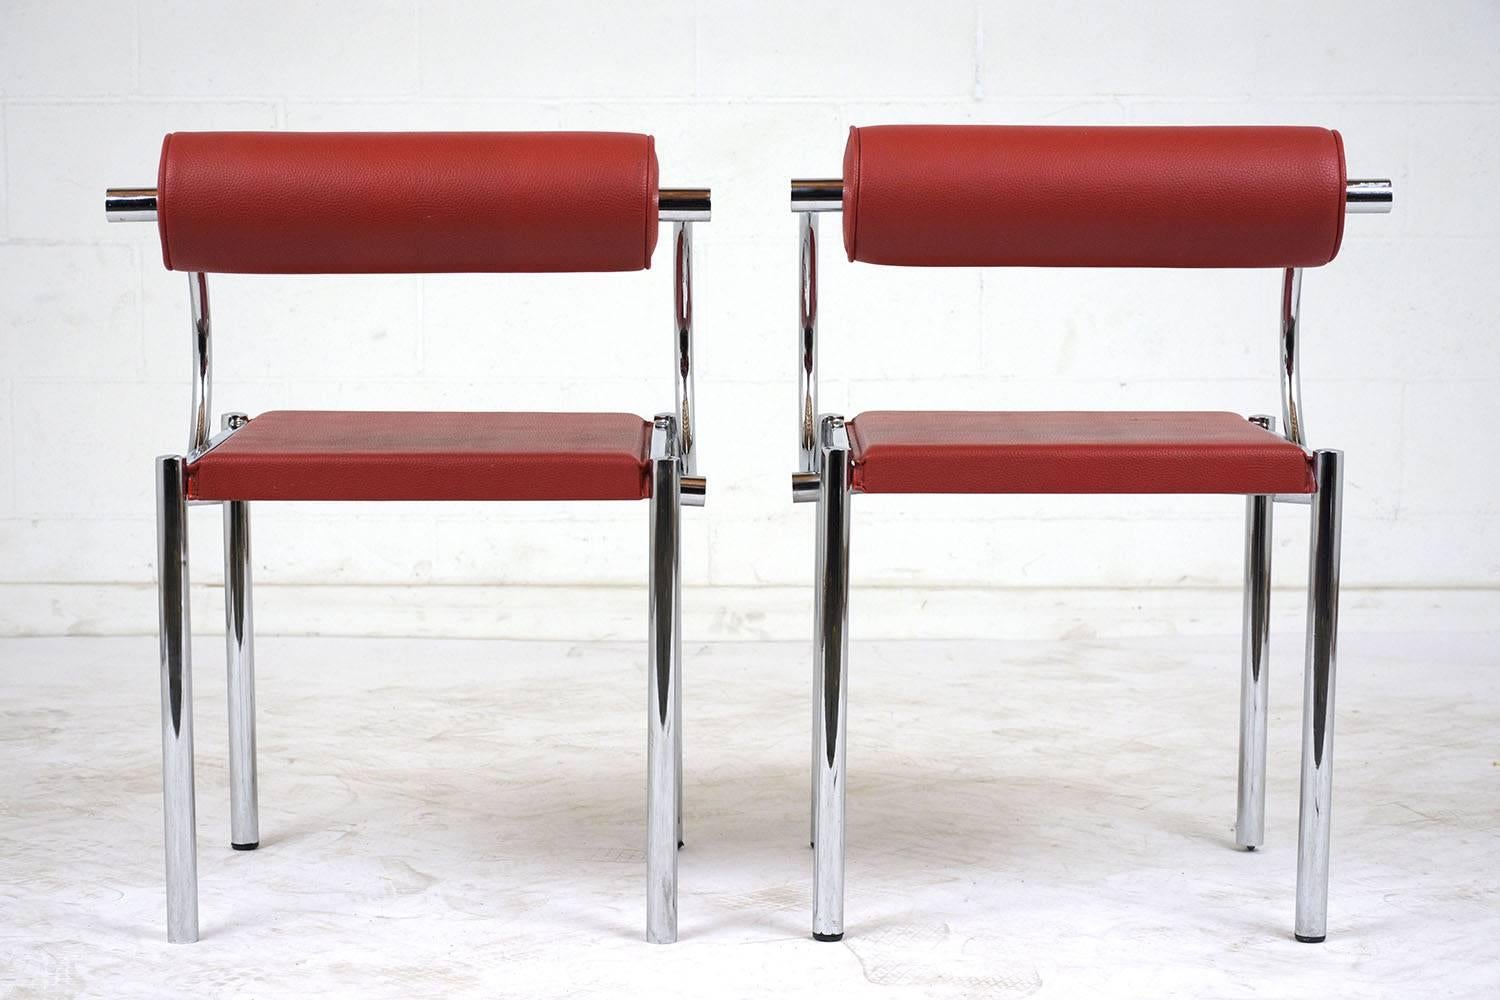 Polished Vintage Pair of Mid-Century Modern Chrome Armchairs